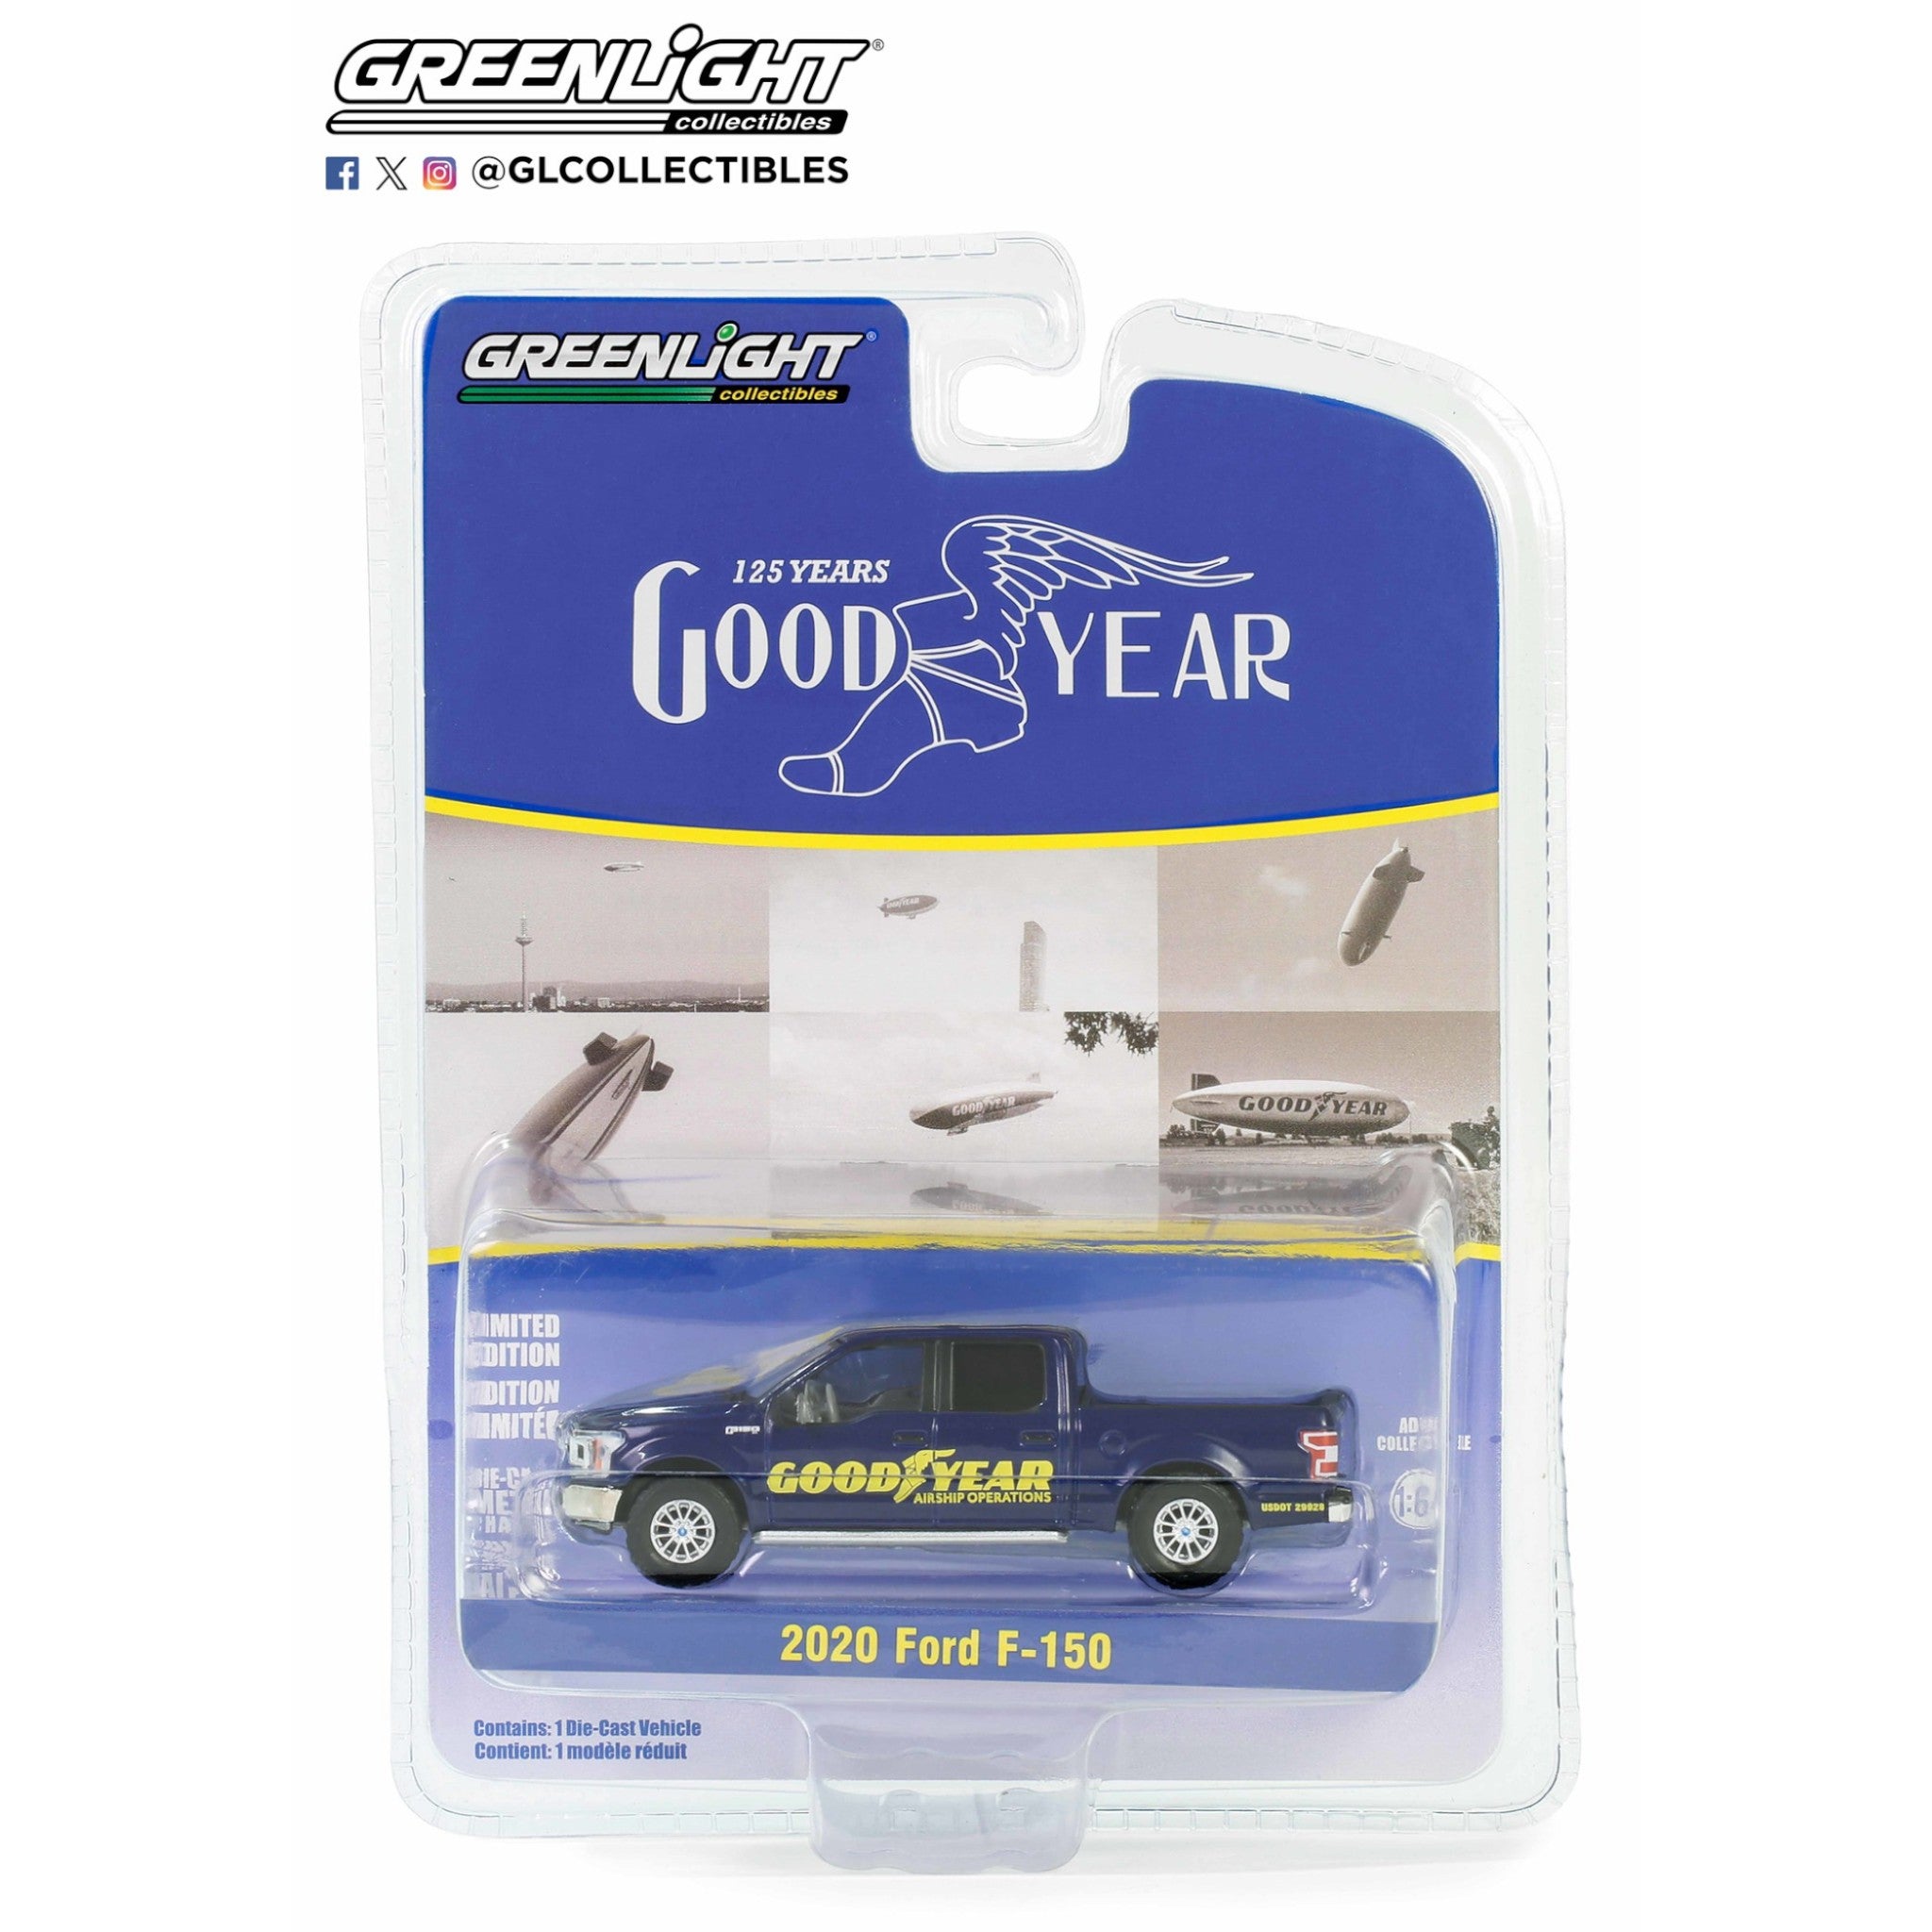 Greenlight - Pre-Order - 2020 Ford F-150 - 125 Years Good Year  - 28140-D - 1:64